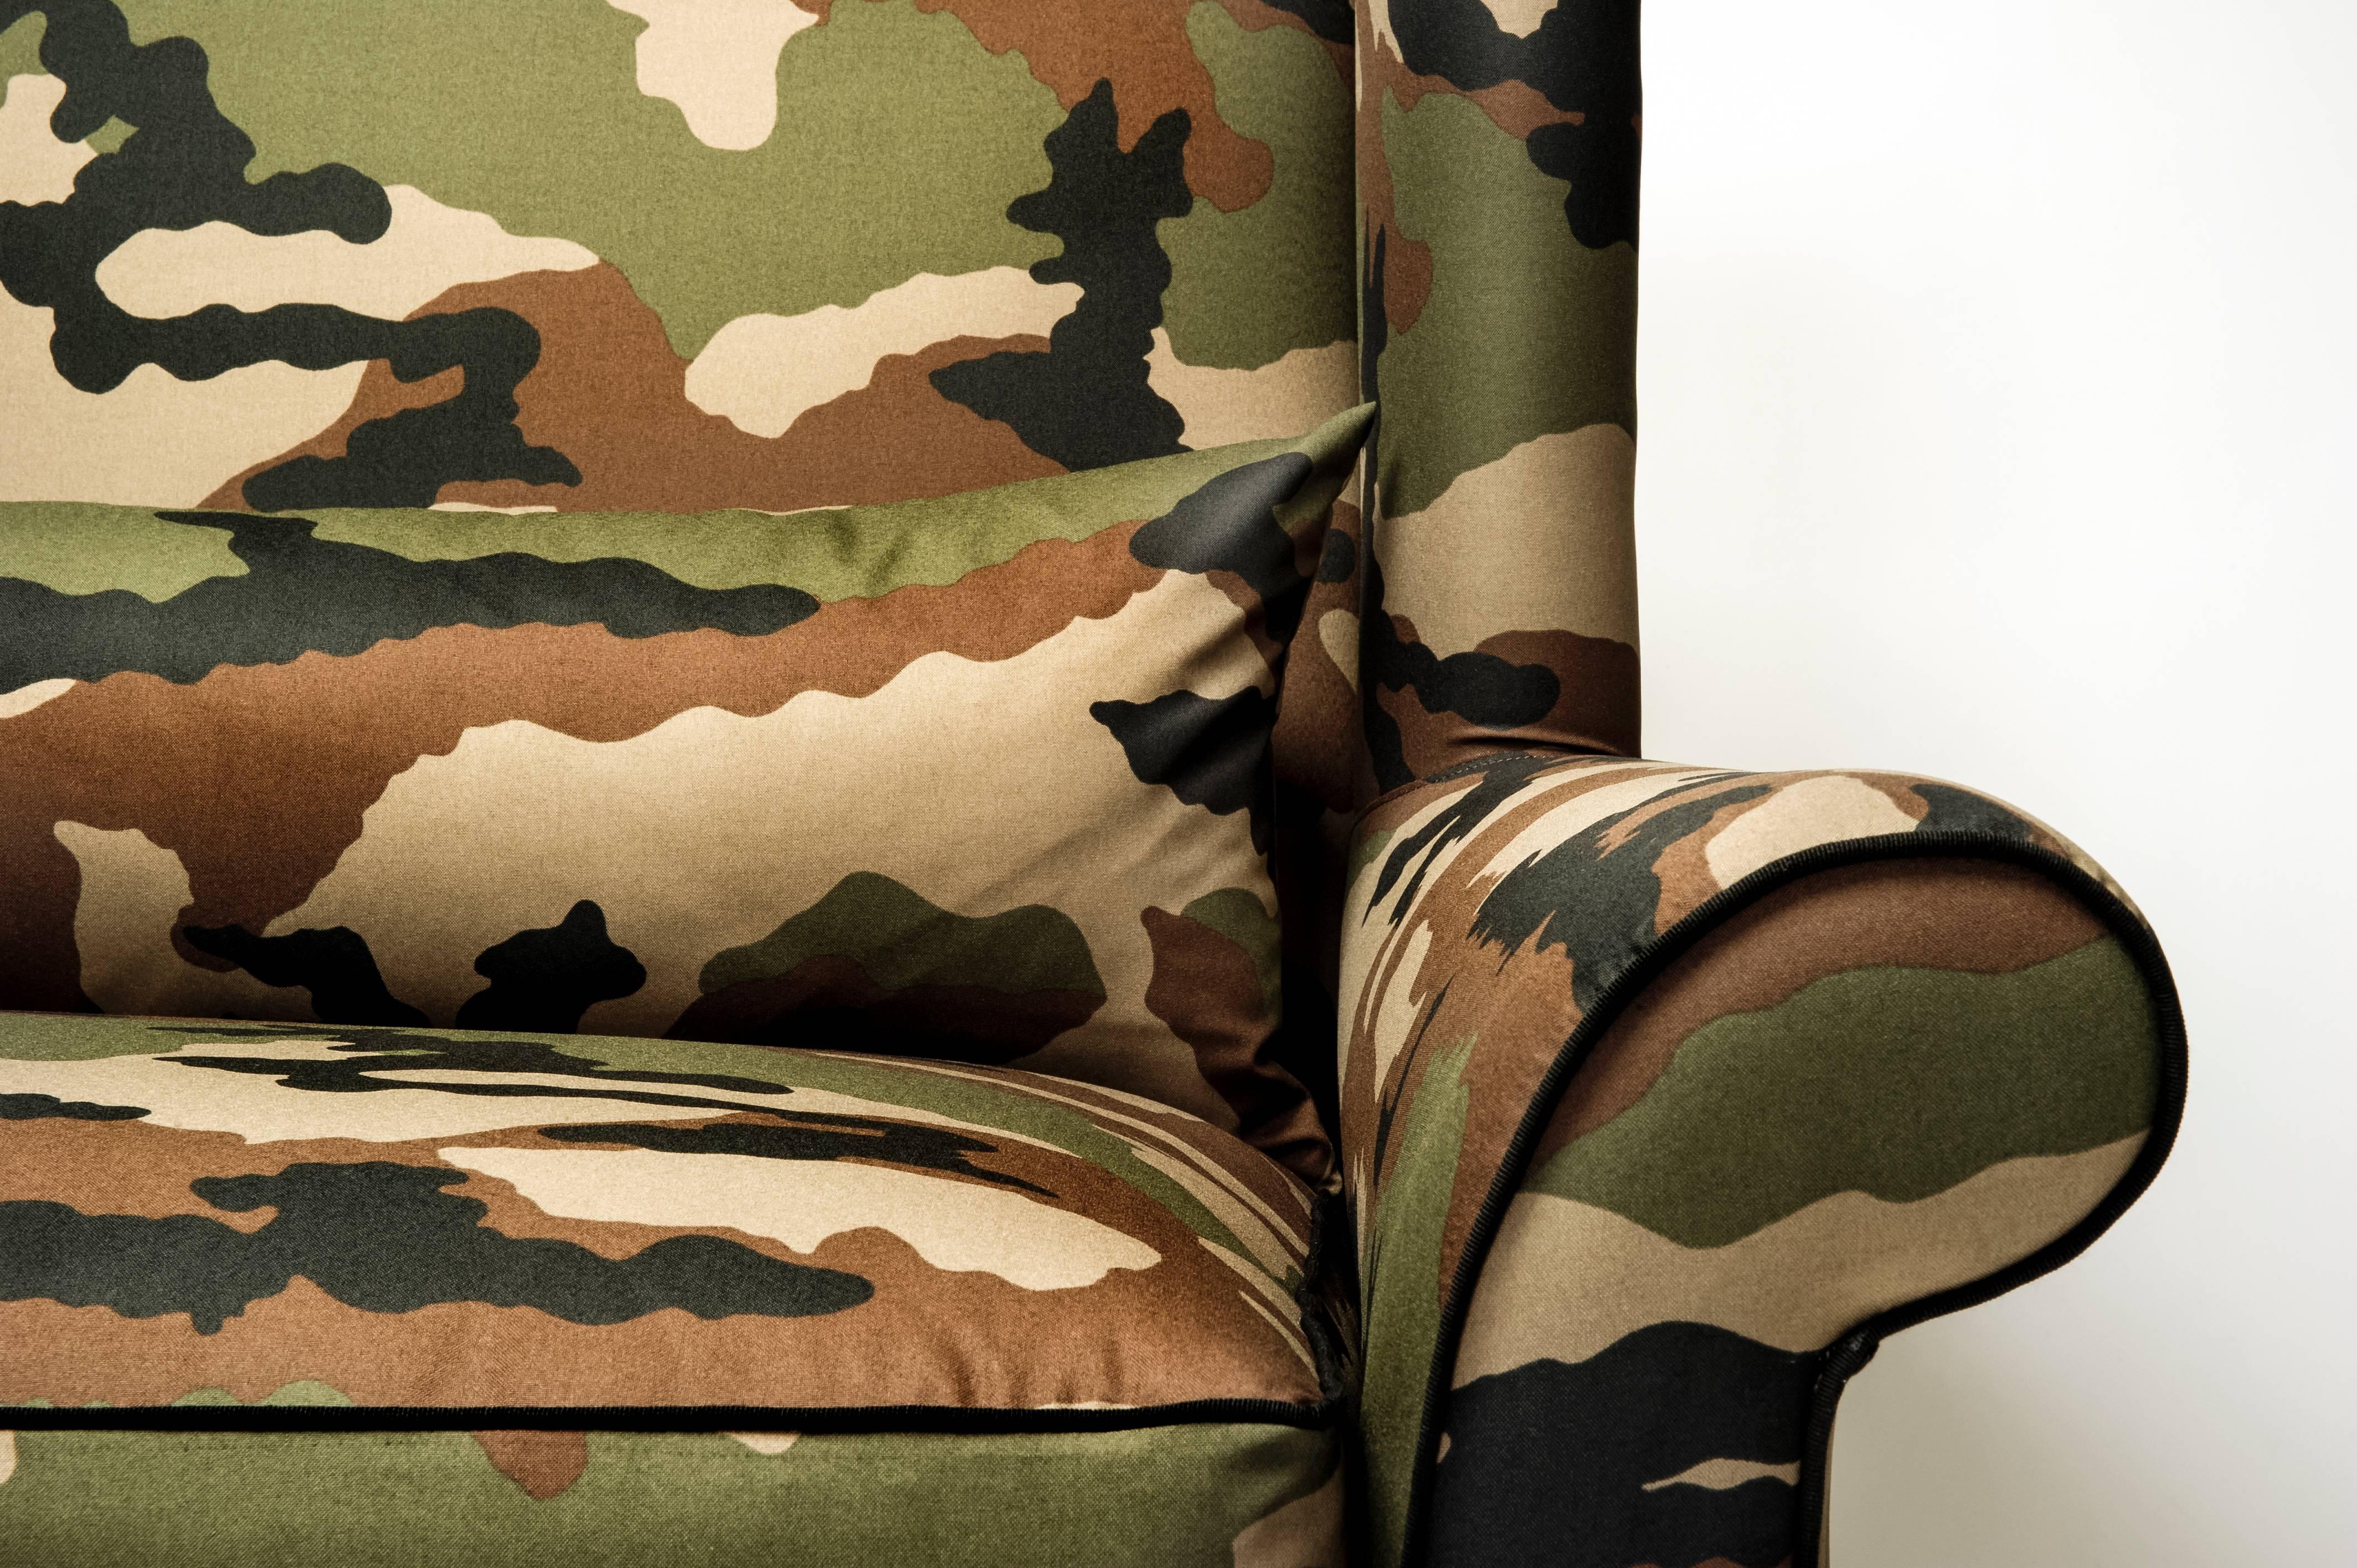 Alexander camouflage loveseat designed by Gianni G. Pellini for Spazio Pontaccio.

Comfortable armchair for two, covered in camouflage cotton fabric, with internal filler in goose feather and hand-sewn finishing piping in contrast. 

Dimensions: